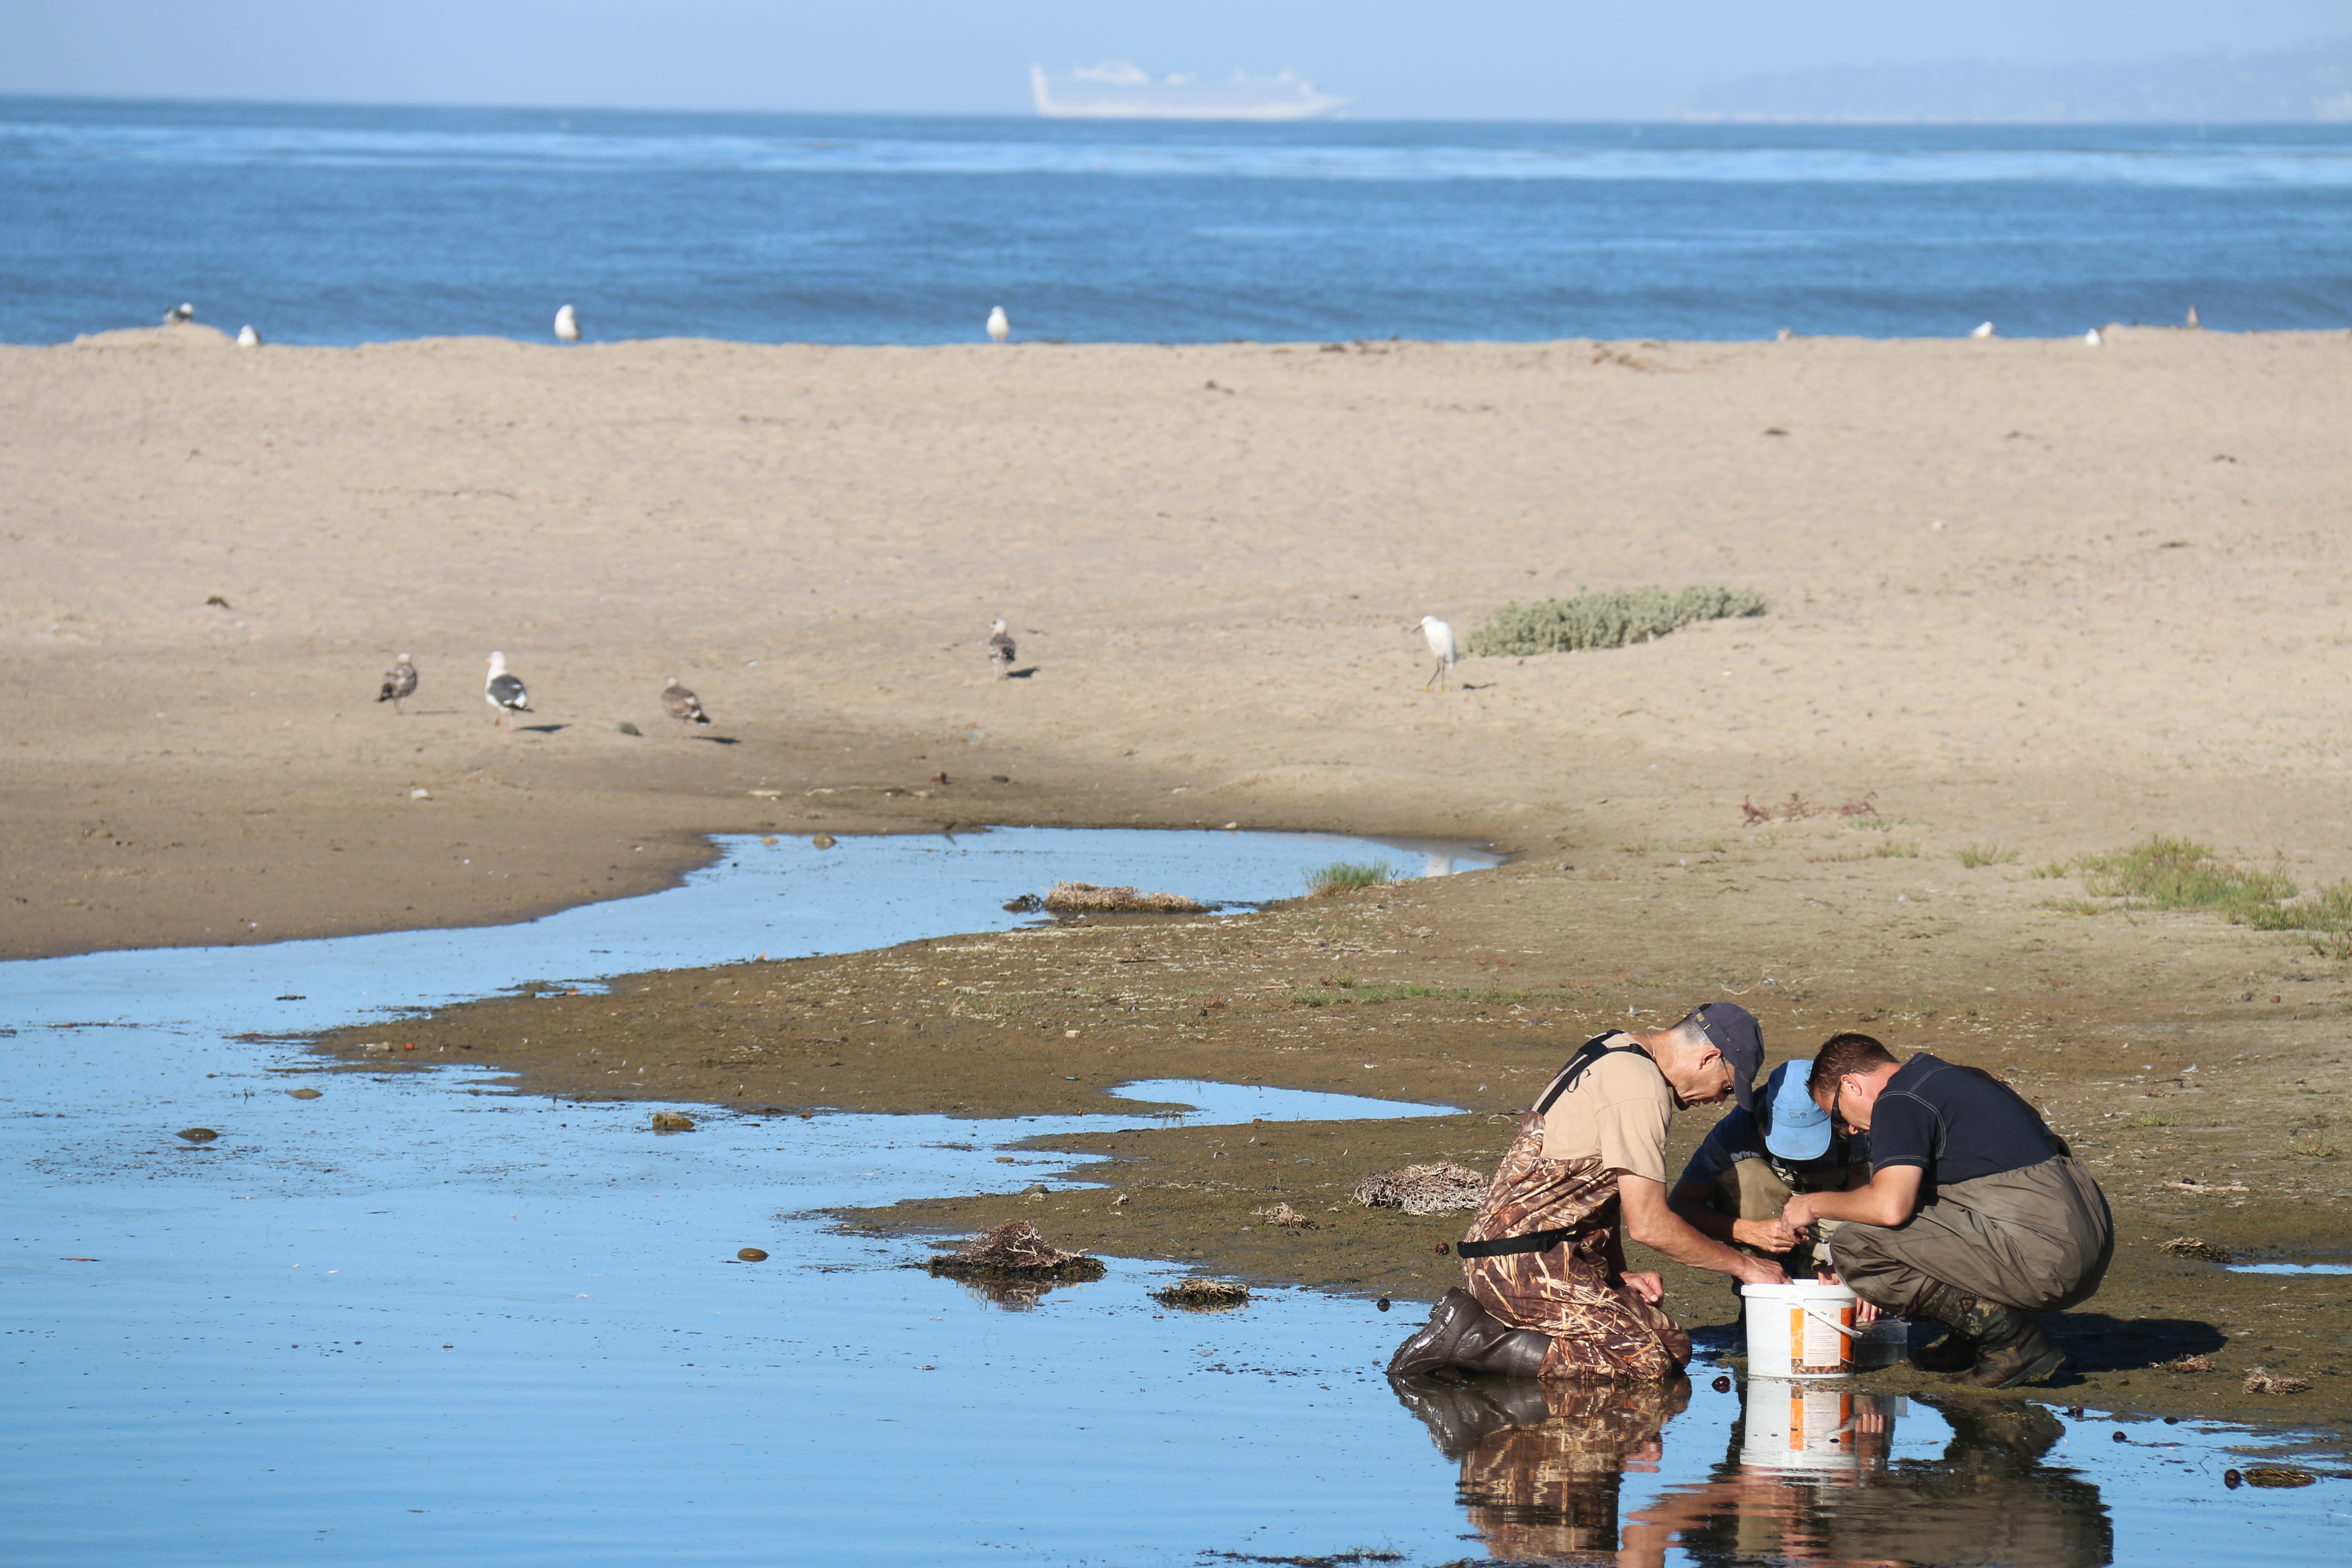 Three biologists in waders kneel over a bucket on the edge of a tide pool.